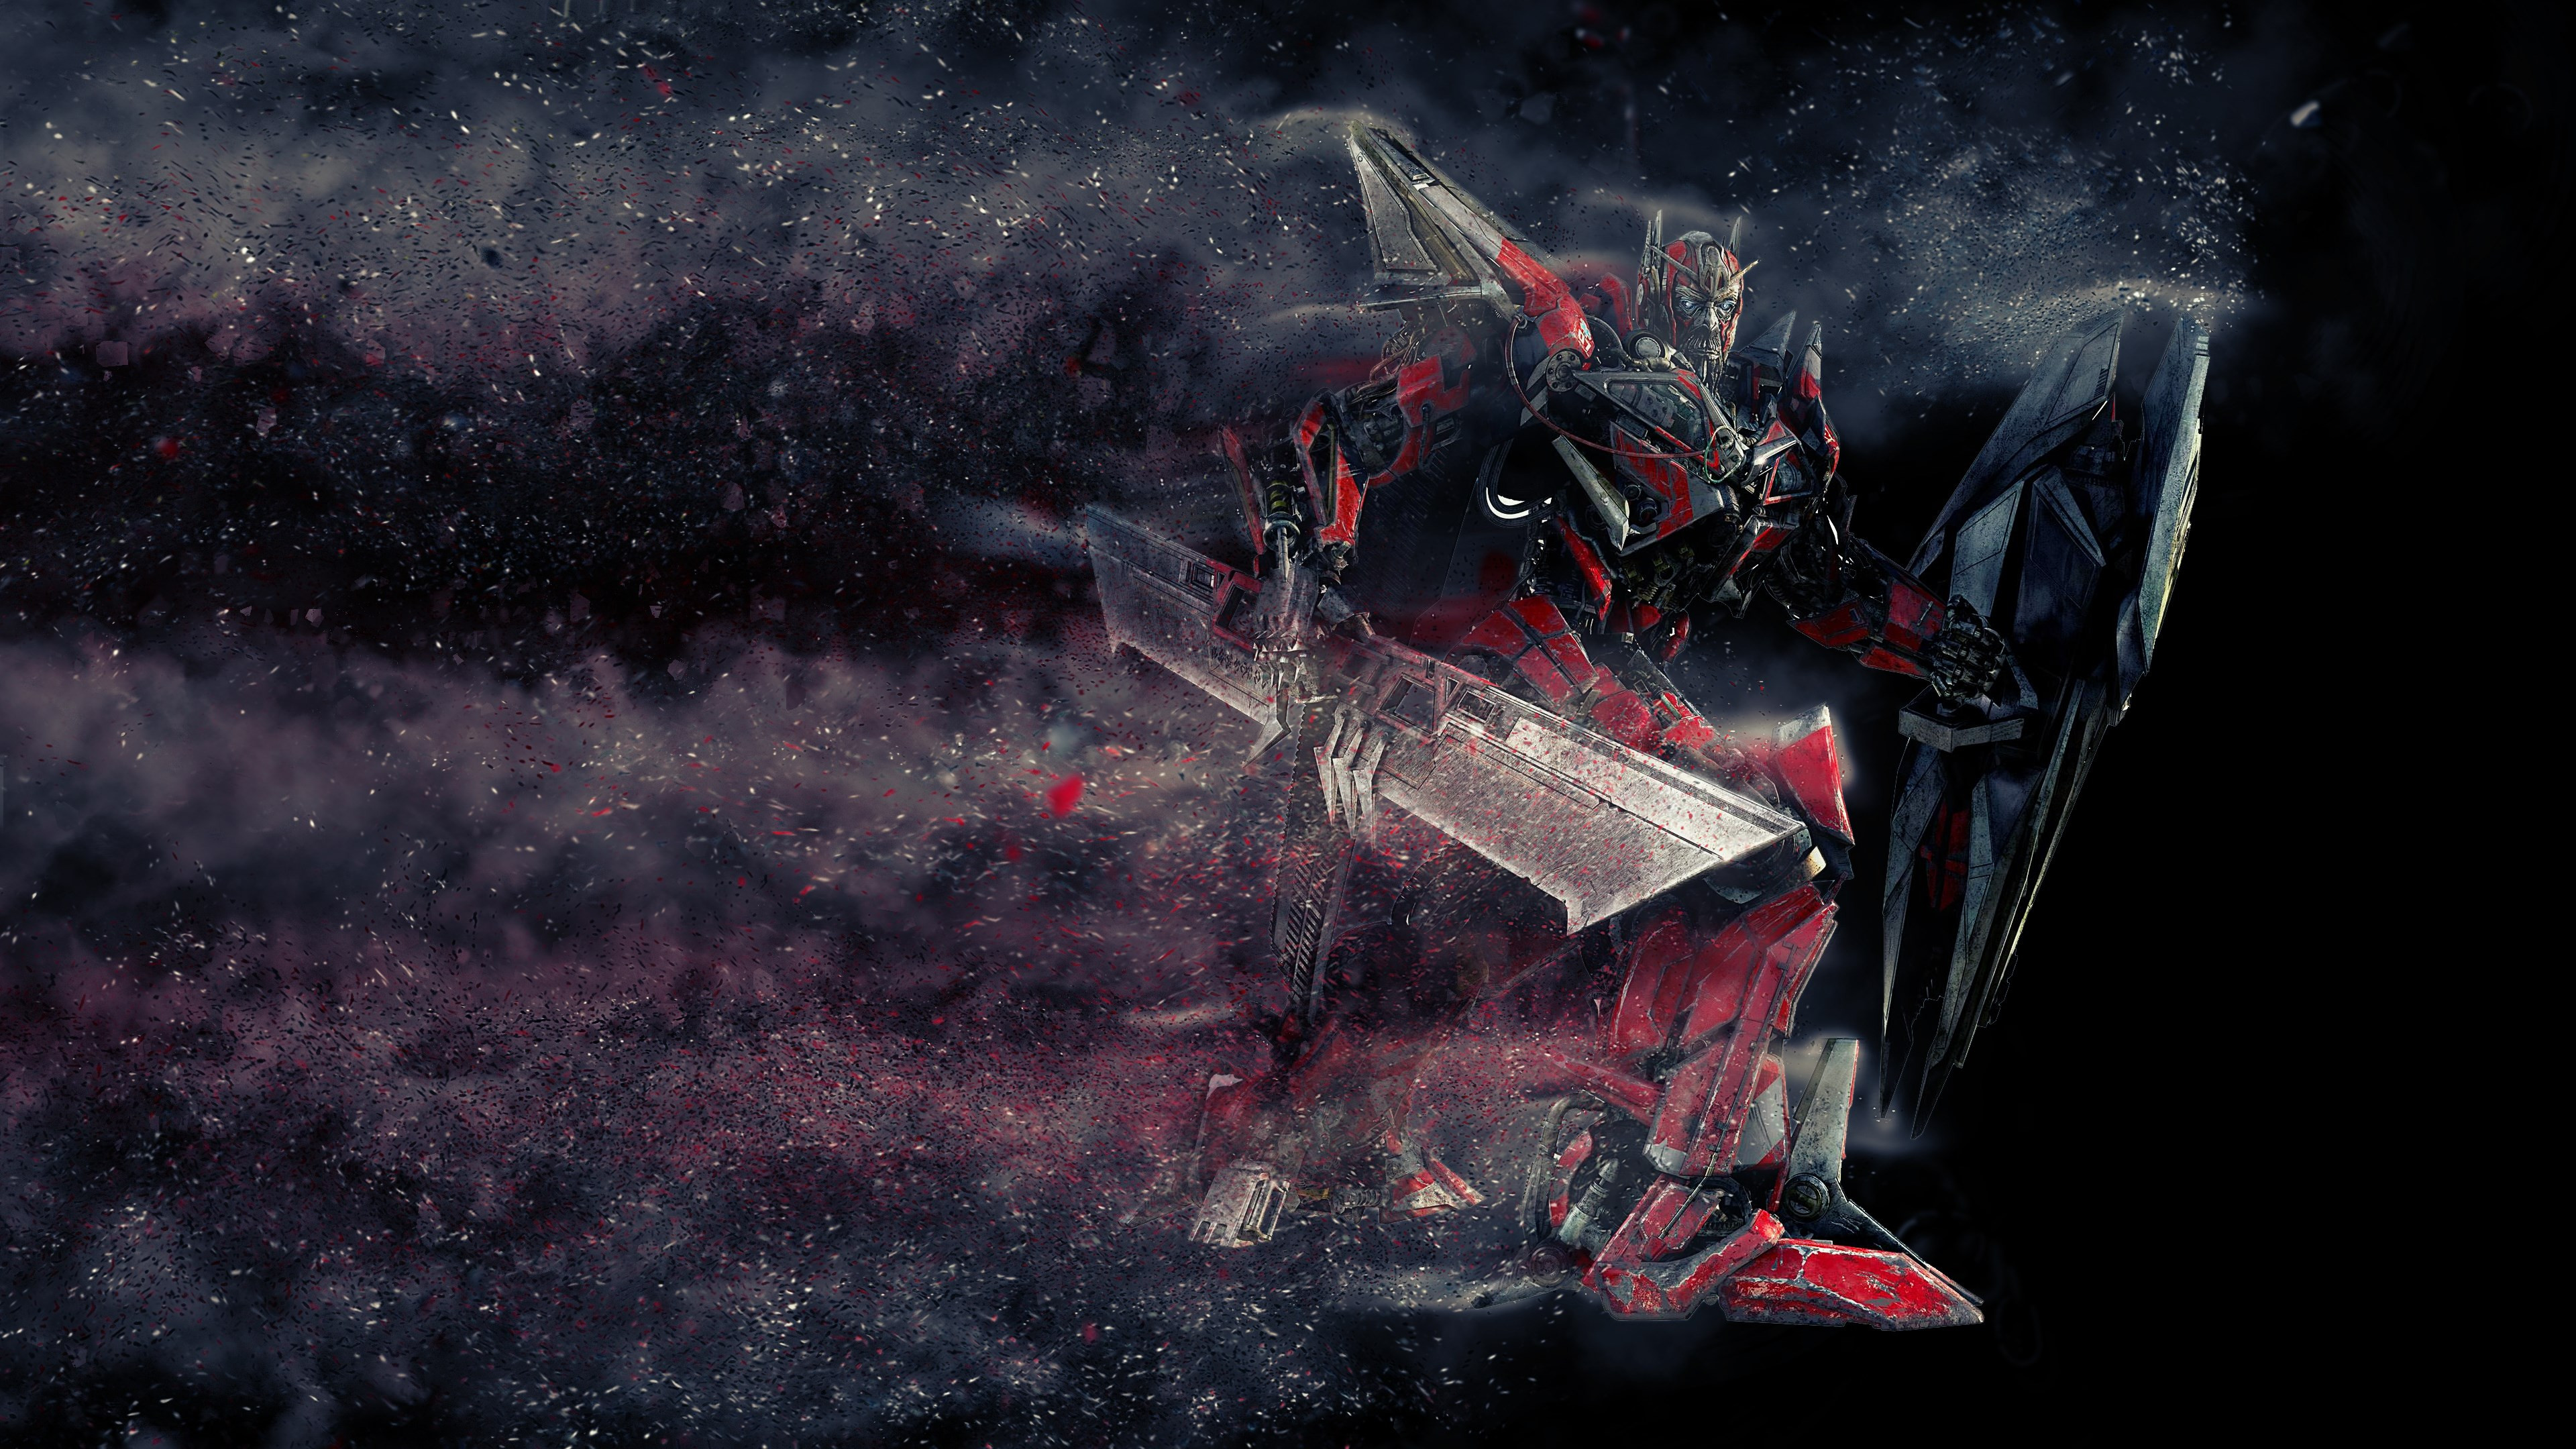 Sentinel Prime from Transformers wallpaper 3840x2160